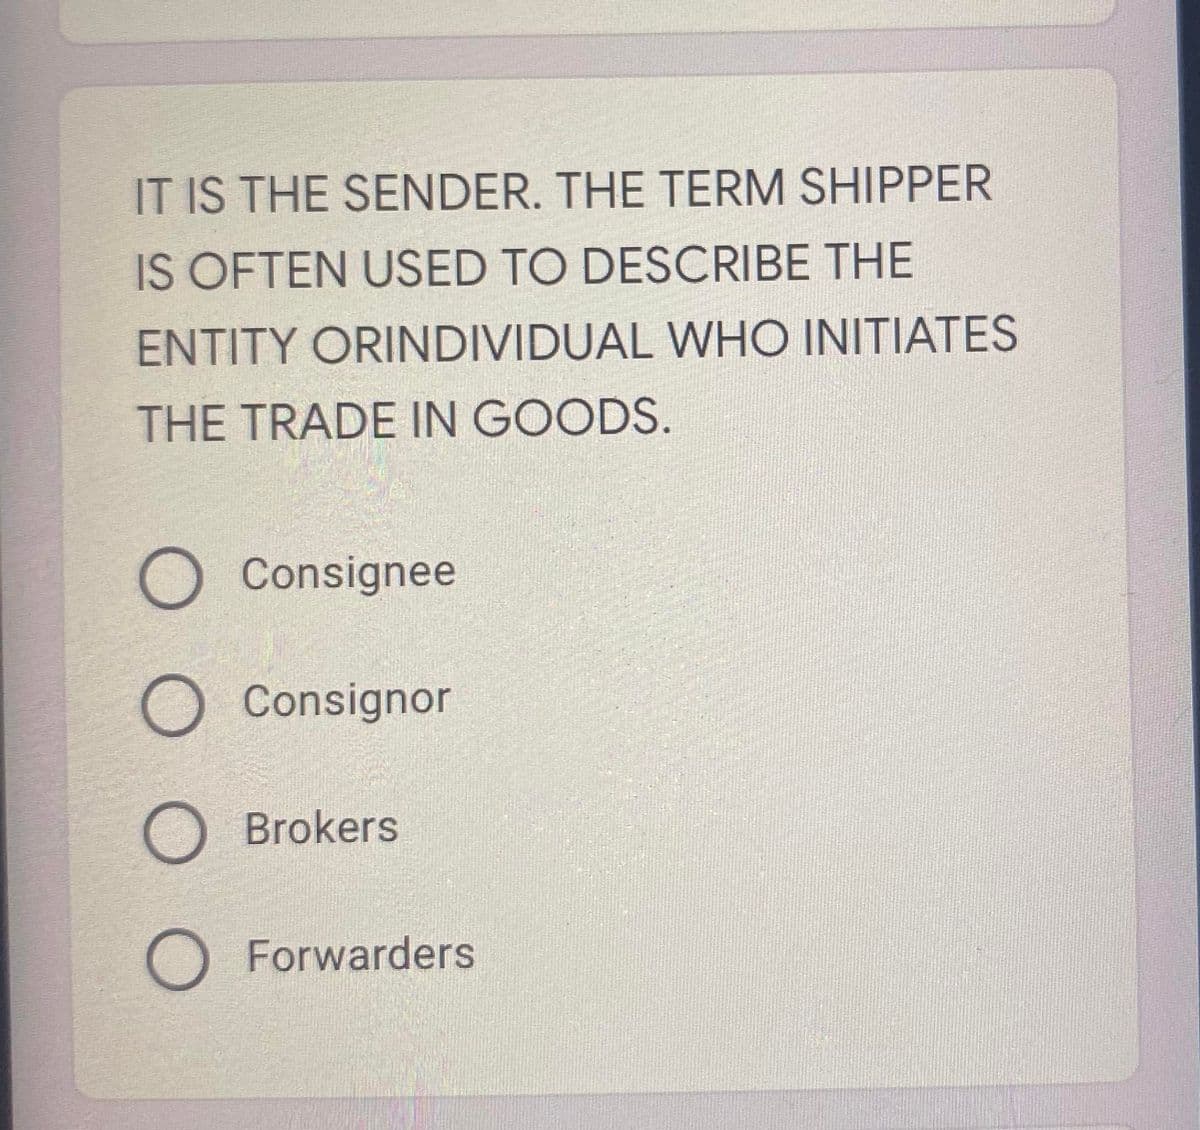 IT IS THE SENDER. THE TERM SHIPPER
IS OFTEN USED TO DESCRIBE THE
ENTITY ORINDIVIDUAL WHO INITIATES
THE TRADE IN GOODS.
O Consignee
O Consignor
O Brokers
O Forwarders
